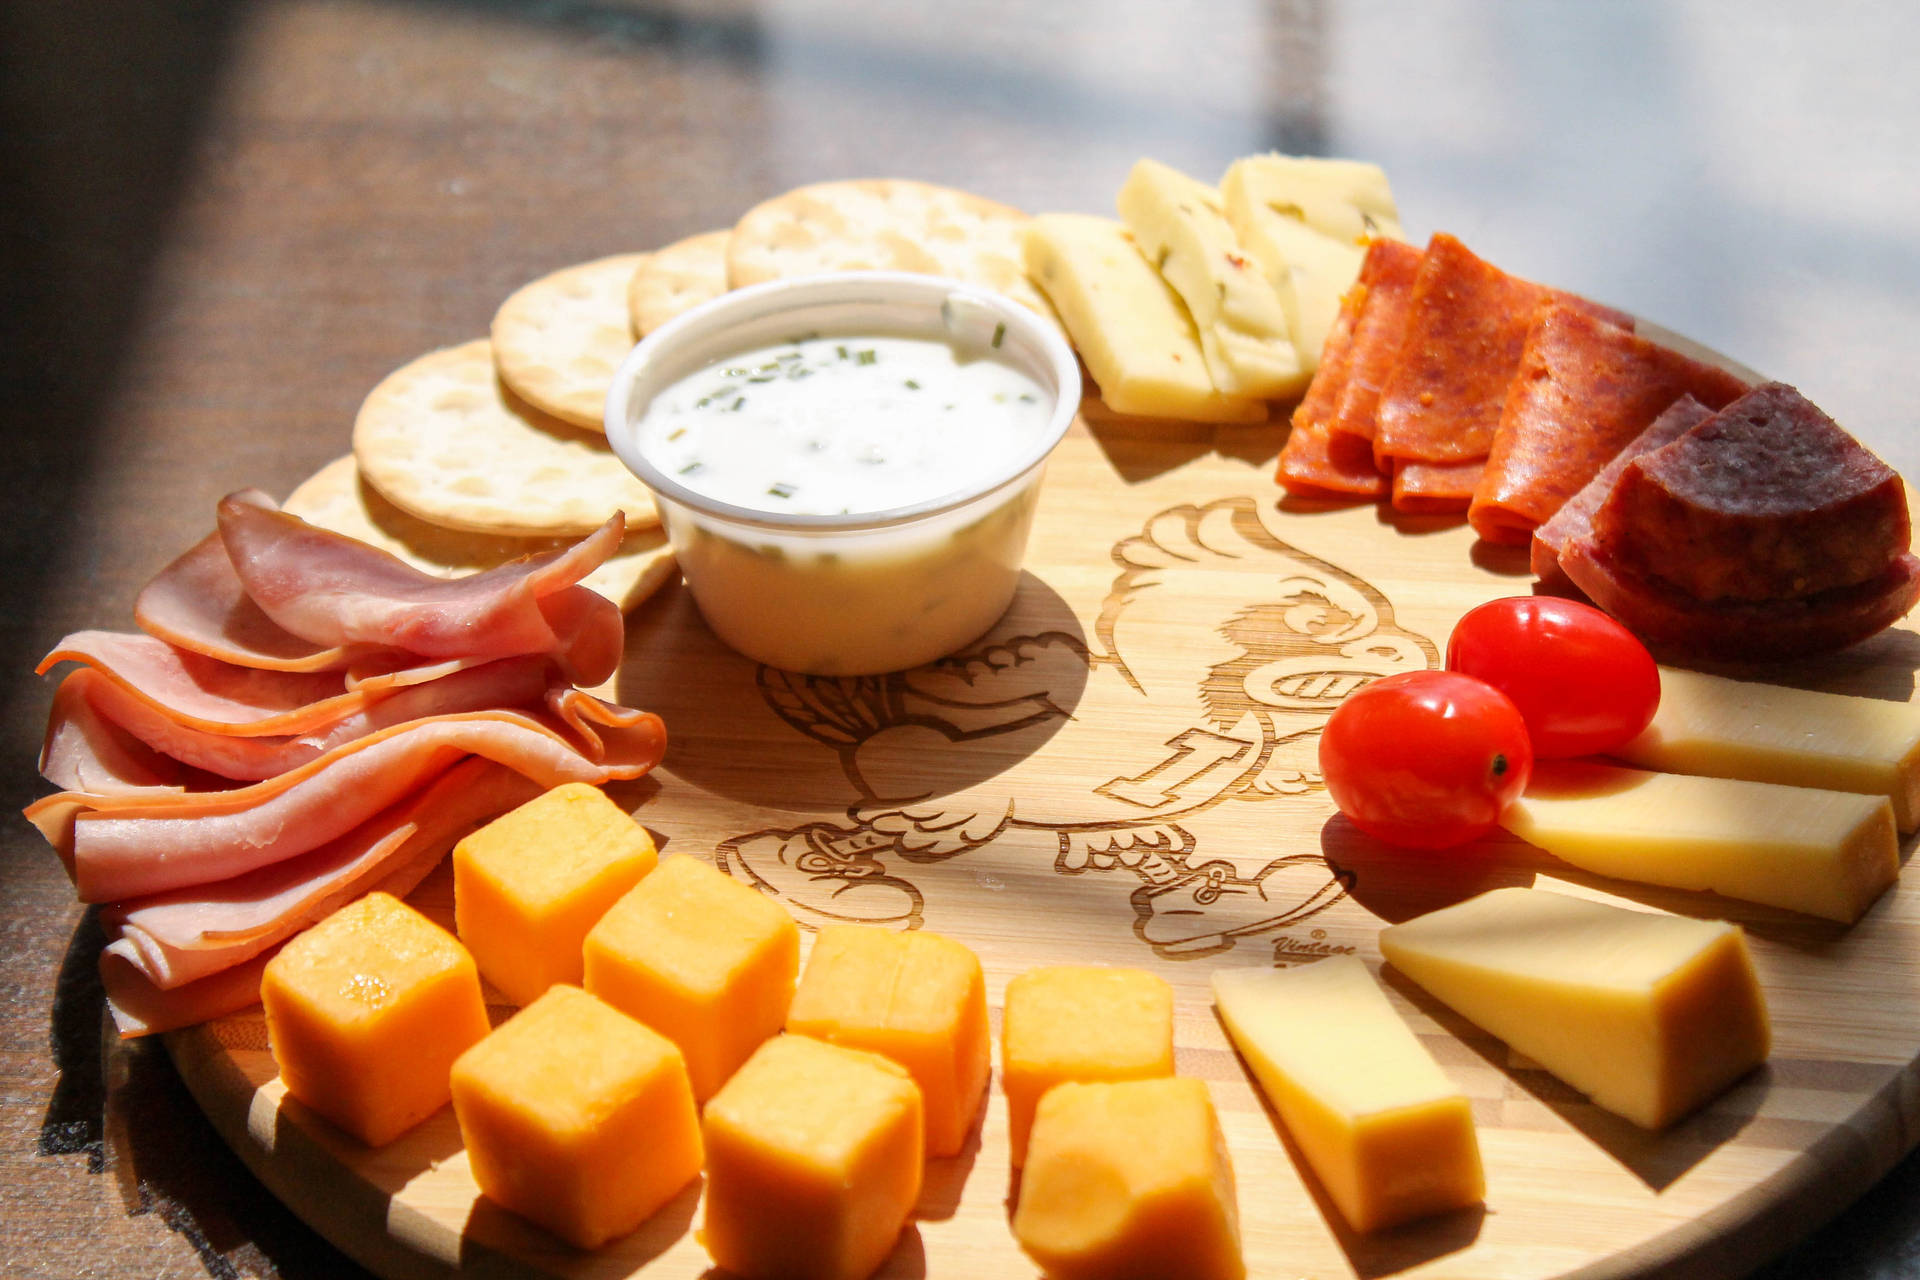 Download Simple Cheese And Meat Platter Wallpaper